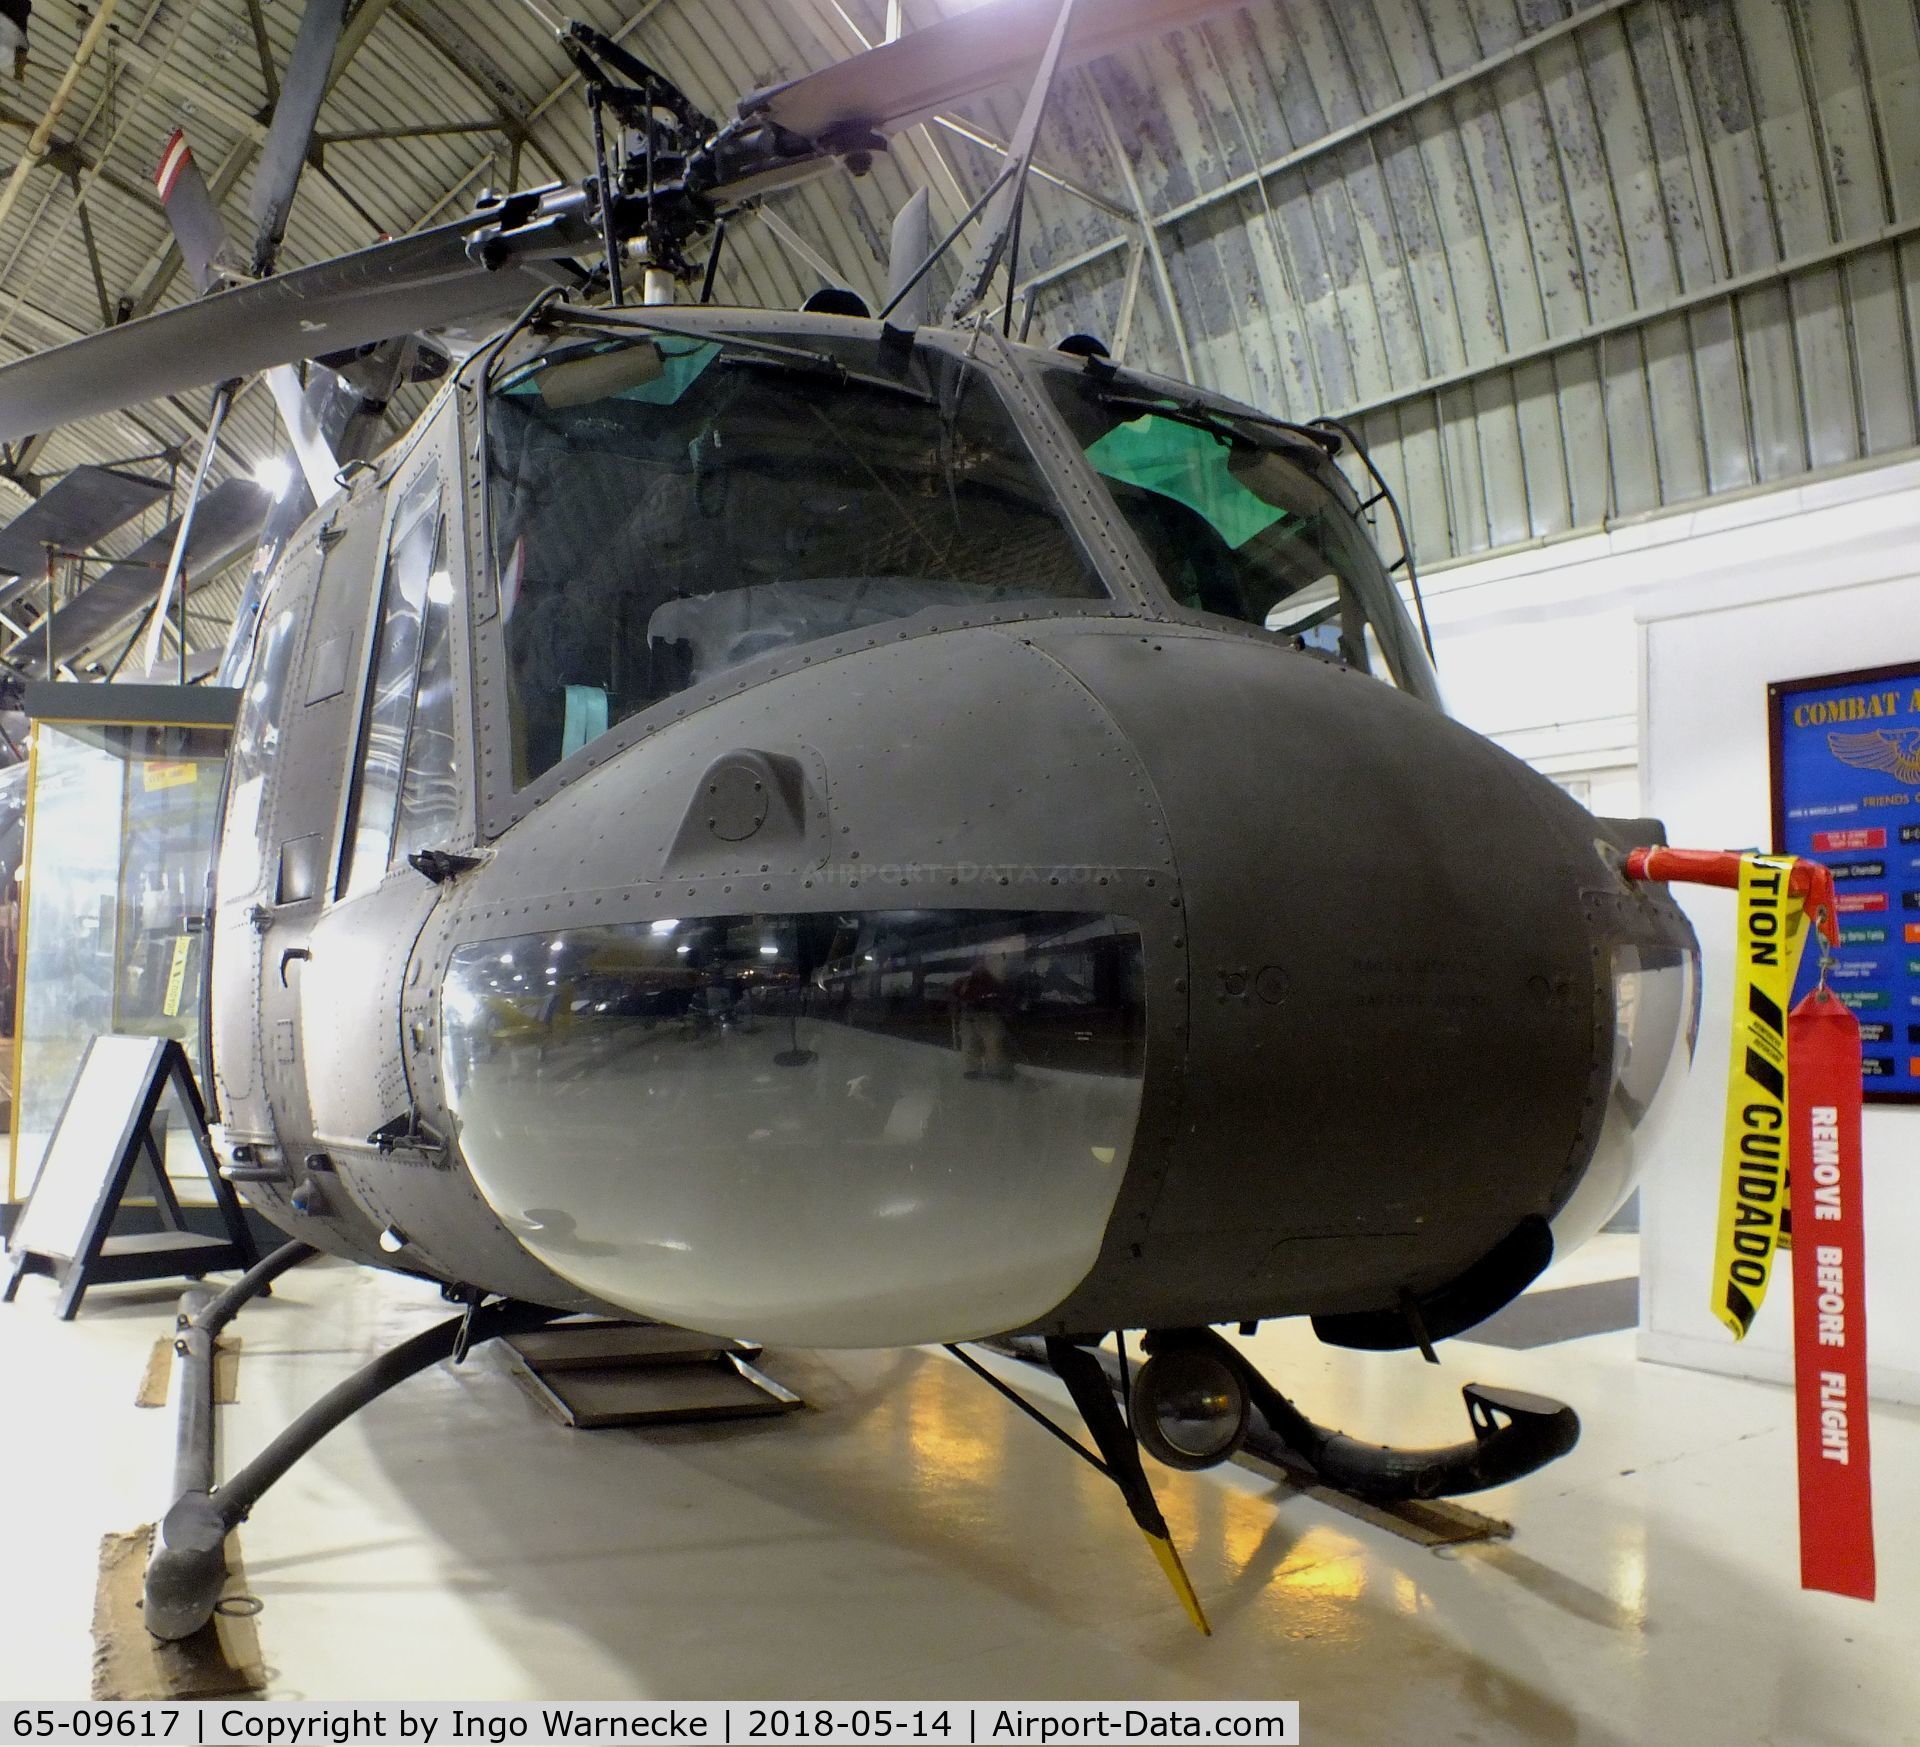 65-09617, 1965 Bell UH-1H Iroquois C/N 4661, Bell UH-1H Iroquois (upgraded from UH-1D) at the Combat Air Museum, Topeka KS